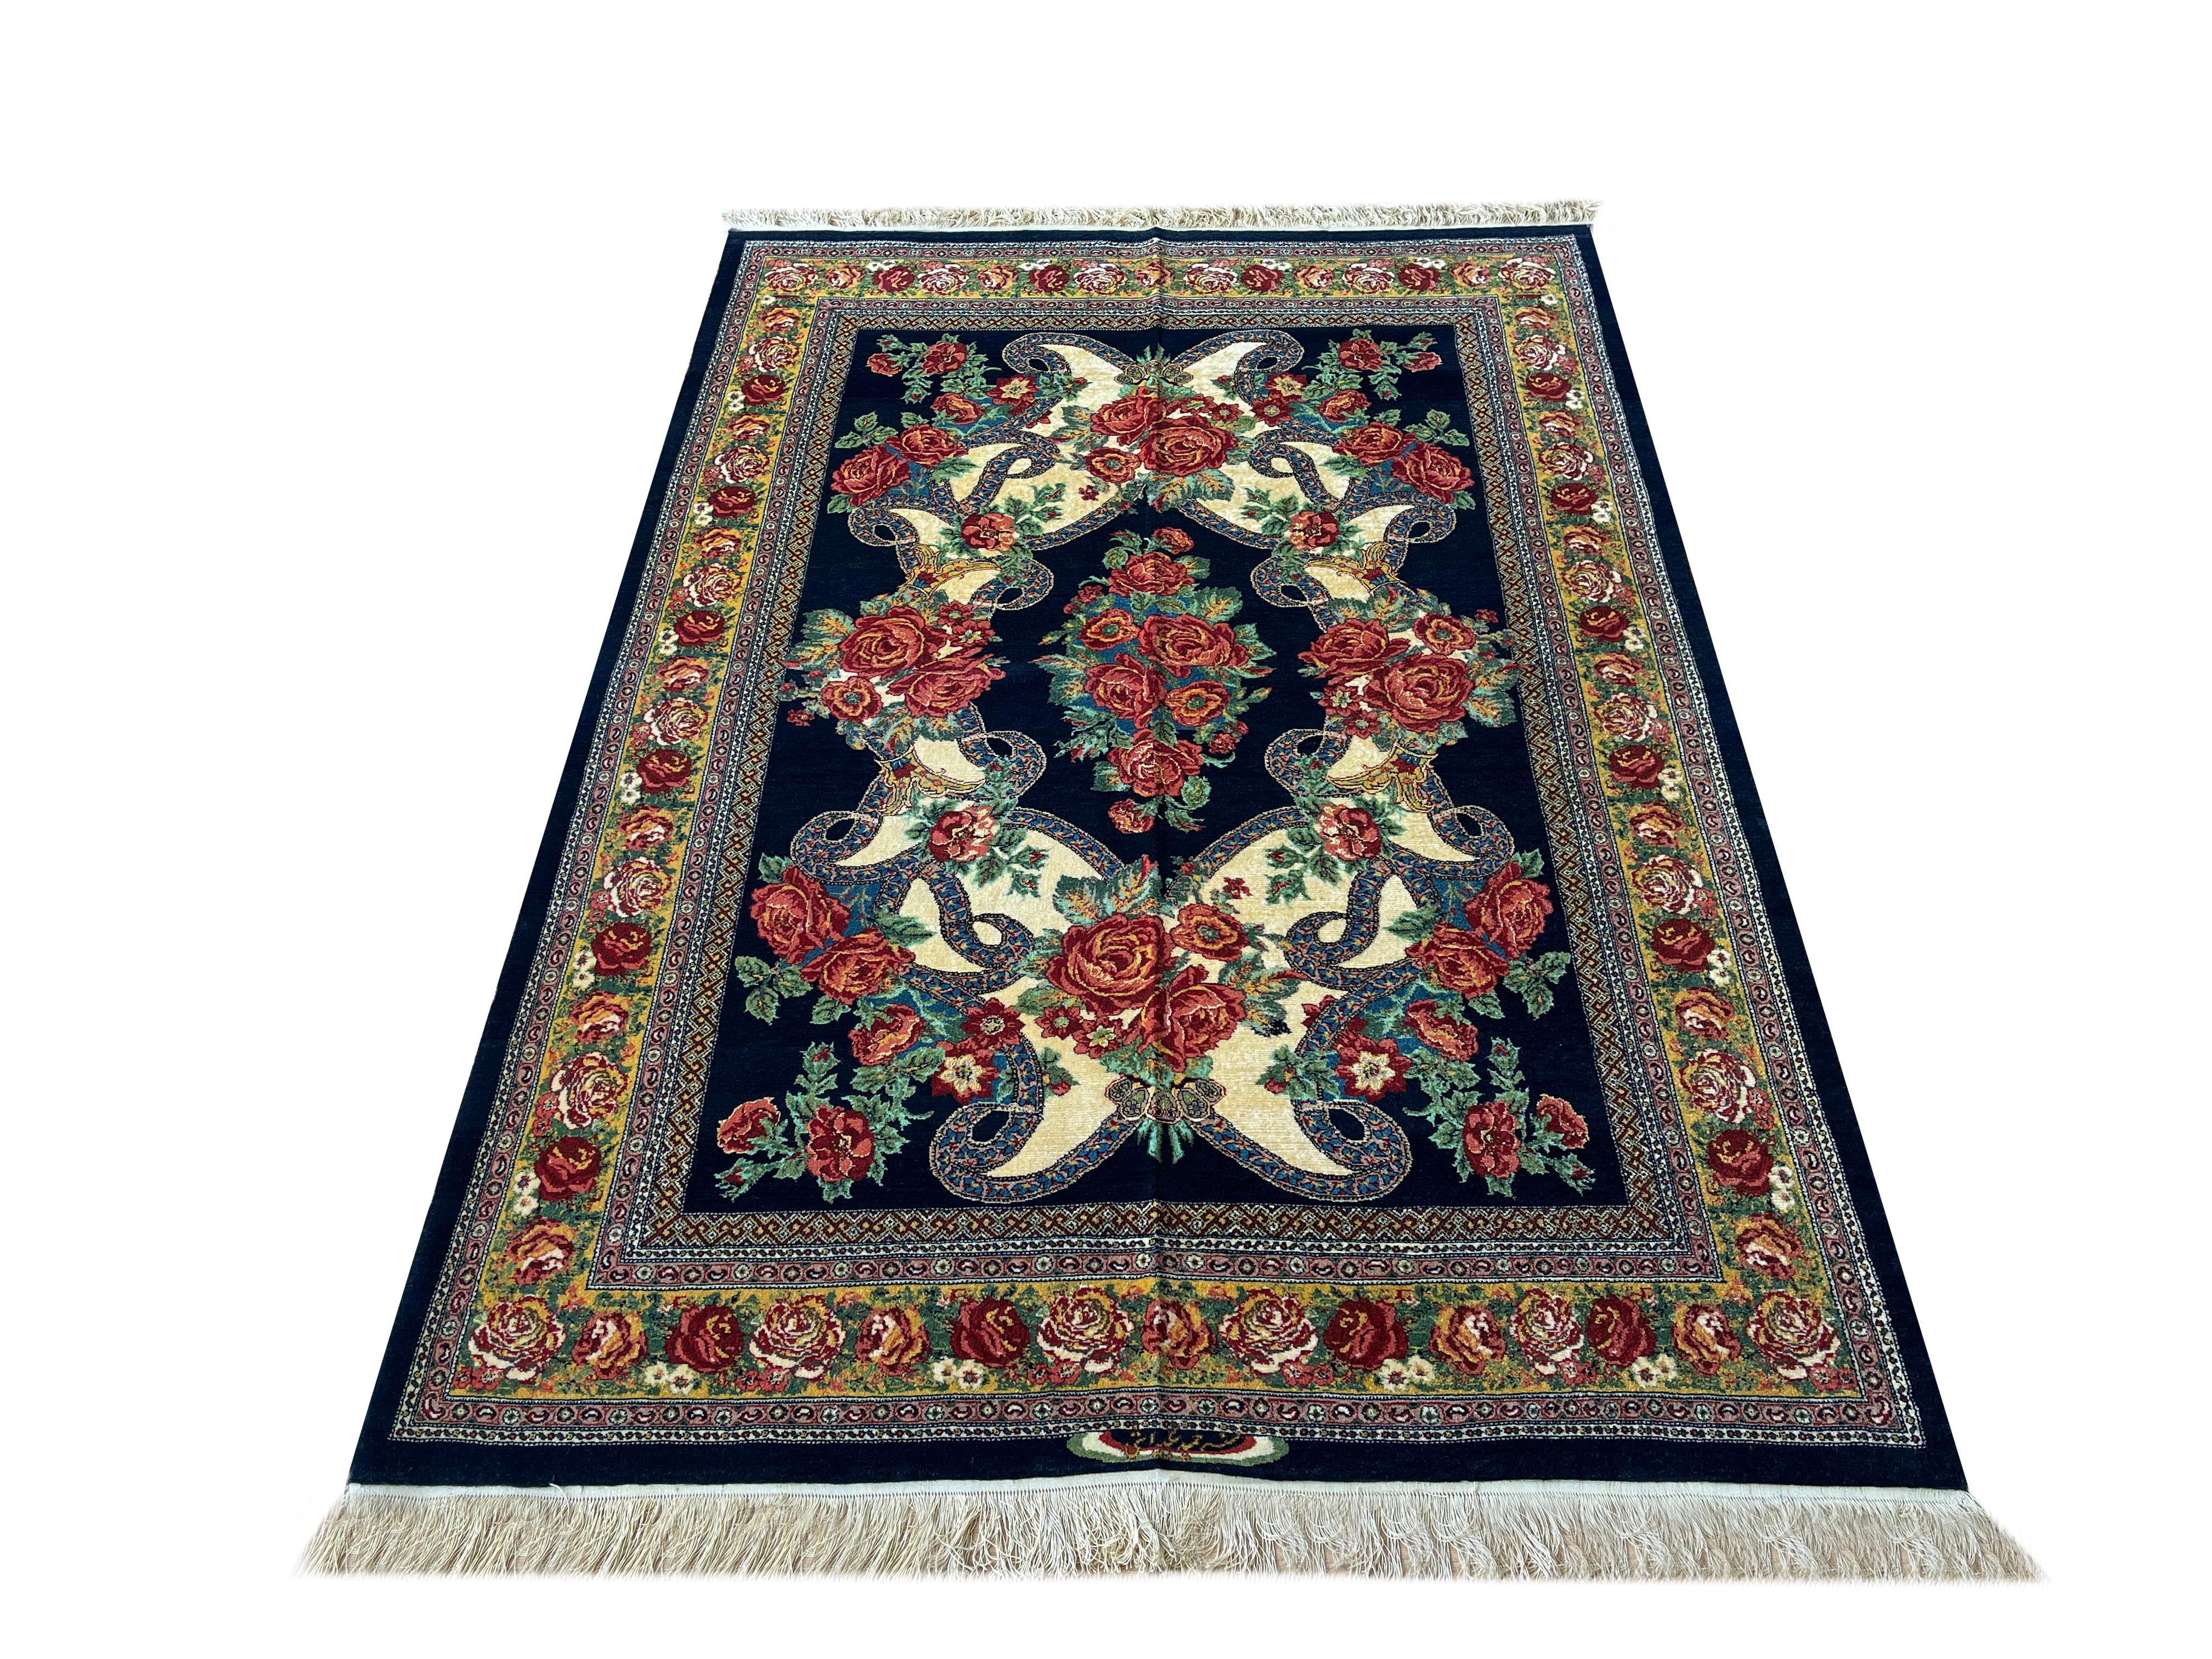 Exclusive magnificent handmade rug made of high-quality materials and designed by a very high-end rug workshop.
The background of this floral rug shows this glittery navy blue and cream rug as very vivid and shiny. 
The design of this rug includes